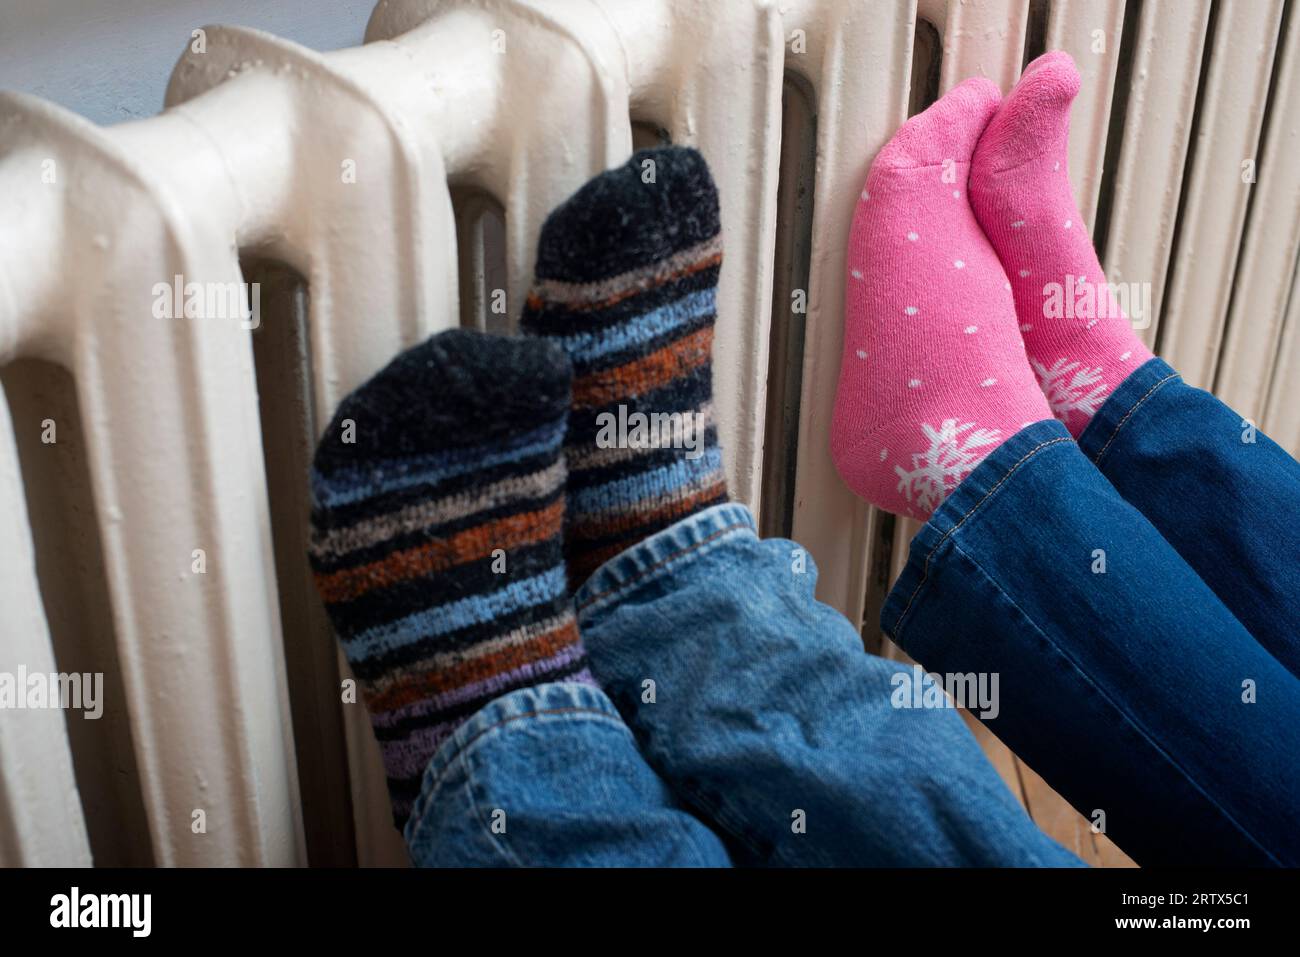 Couple warming up their feet on central heating radiator. Stock Photo